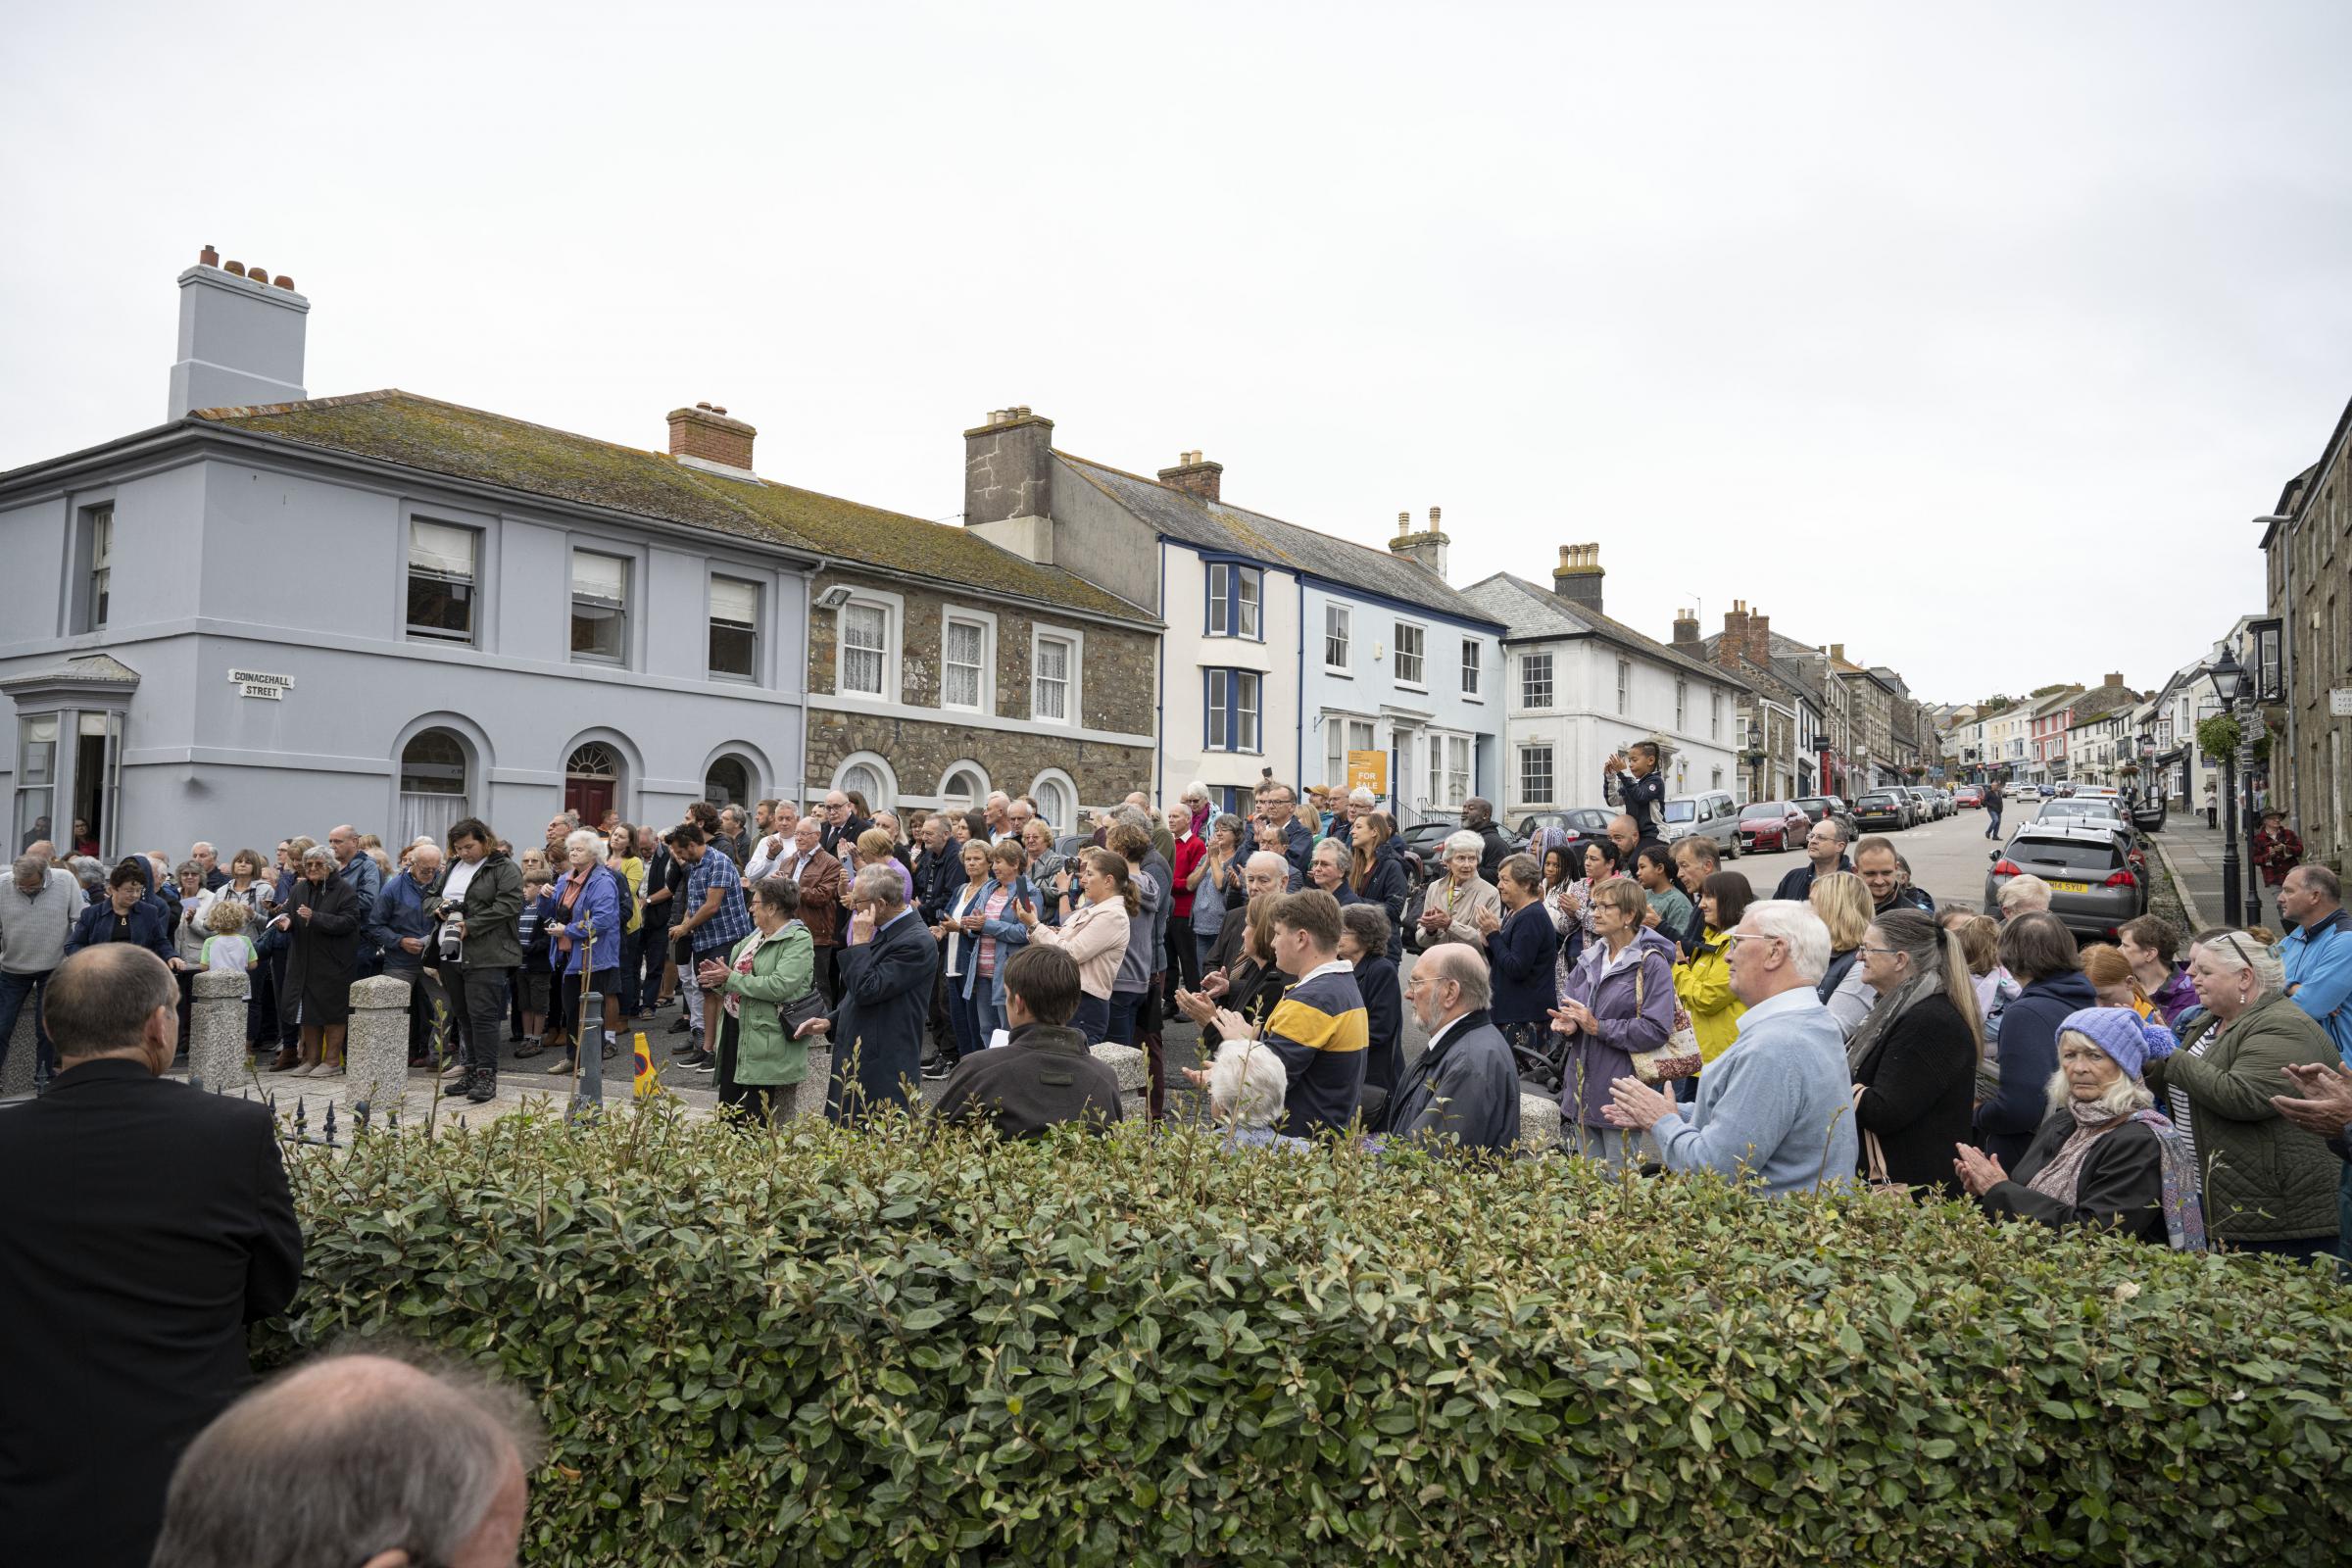 Crowds gathered to see the Proclomation. Picture: Kathy White